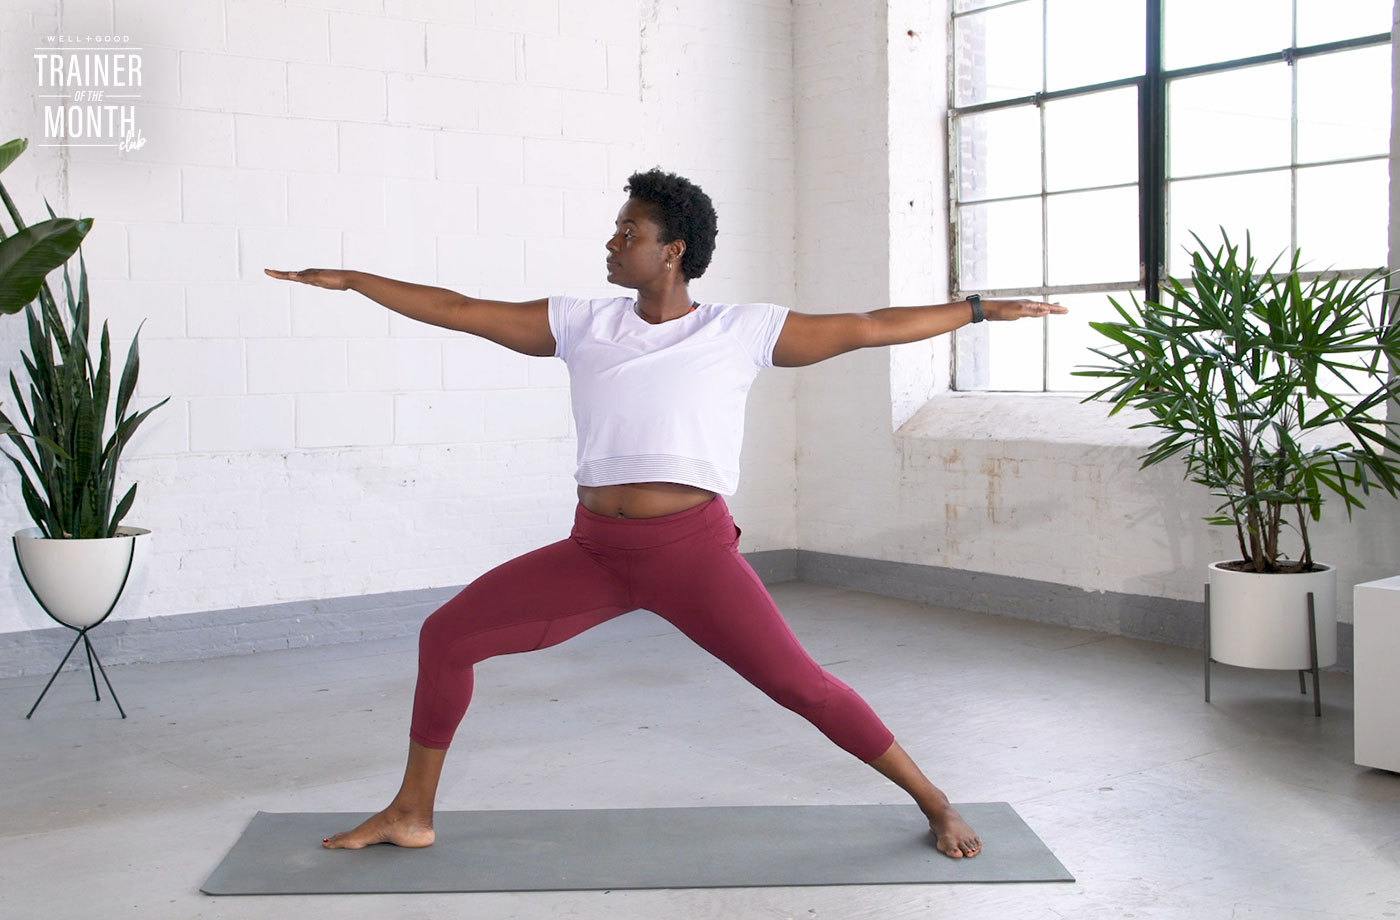 A 7-minute beginner yoga flow to practice at home